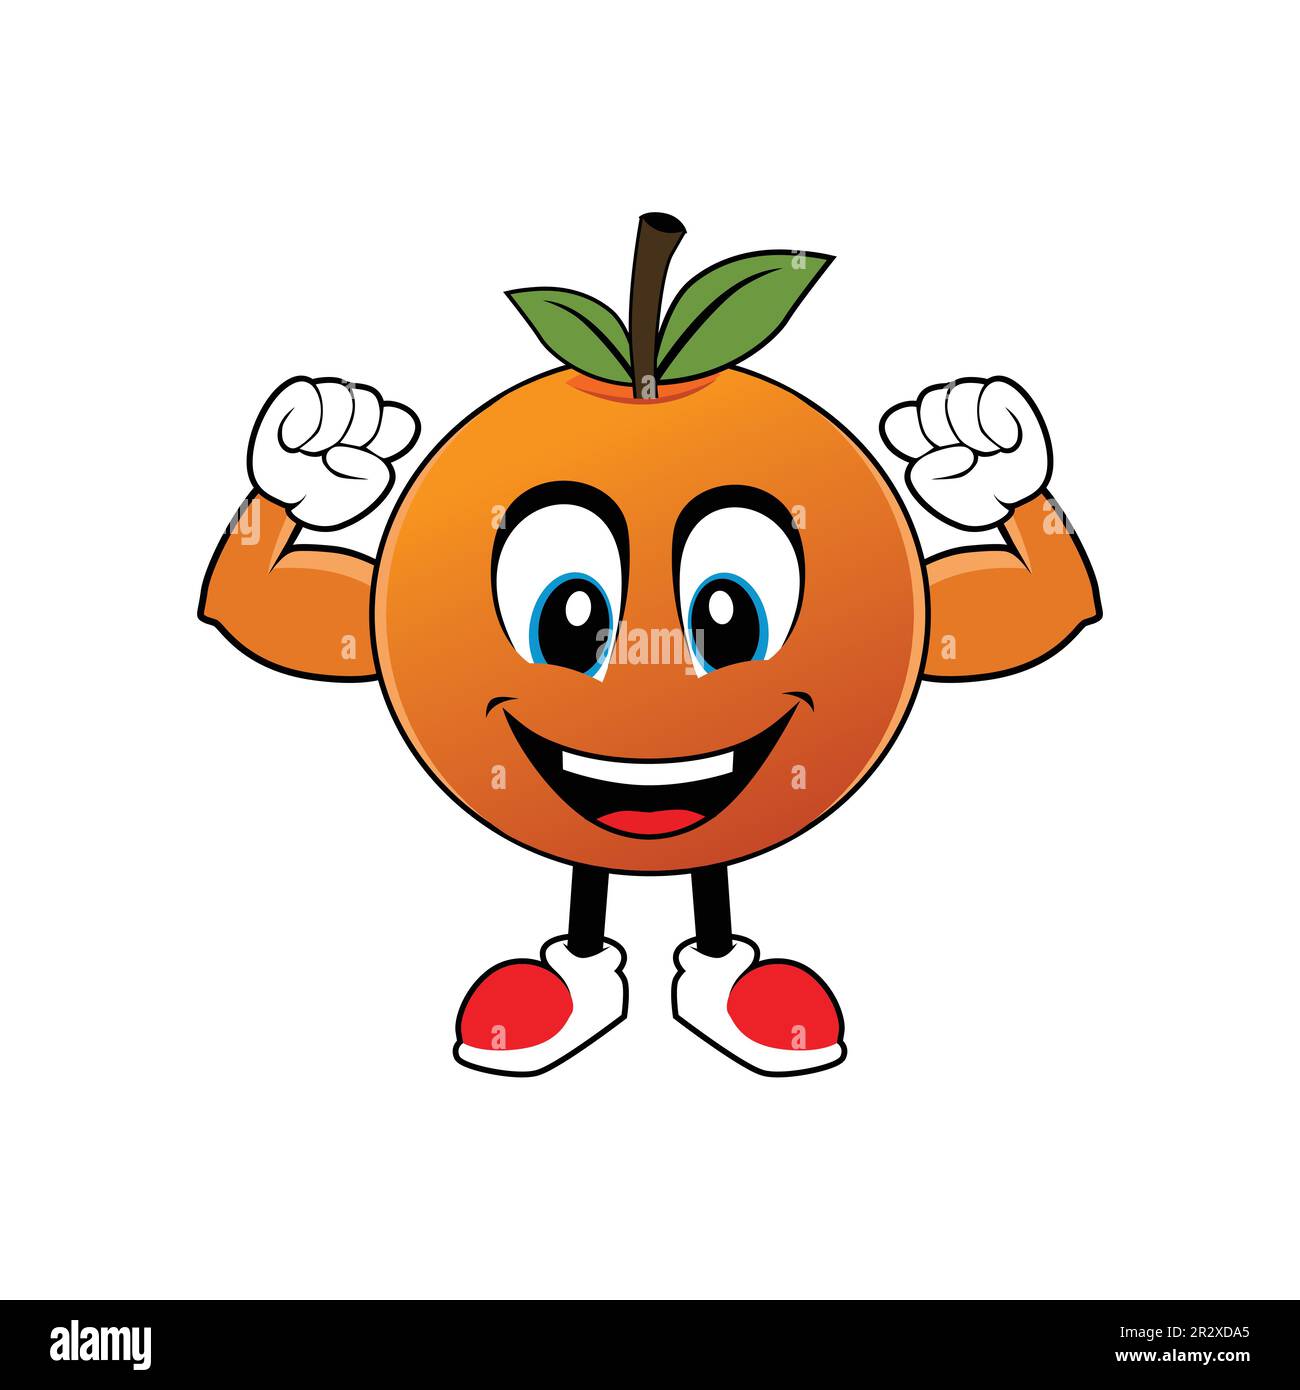 Smiling Orange Fruit Cartoon Mascot with Muscle Arms .Illustration for sticker icon mascot and logo Stock Vector